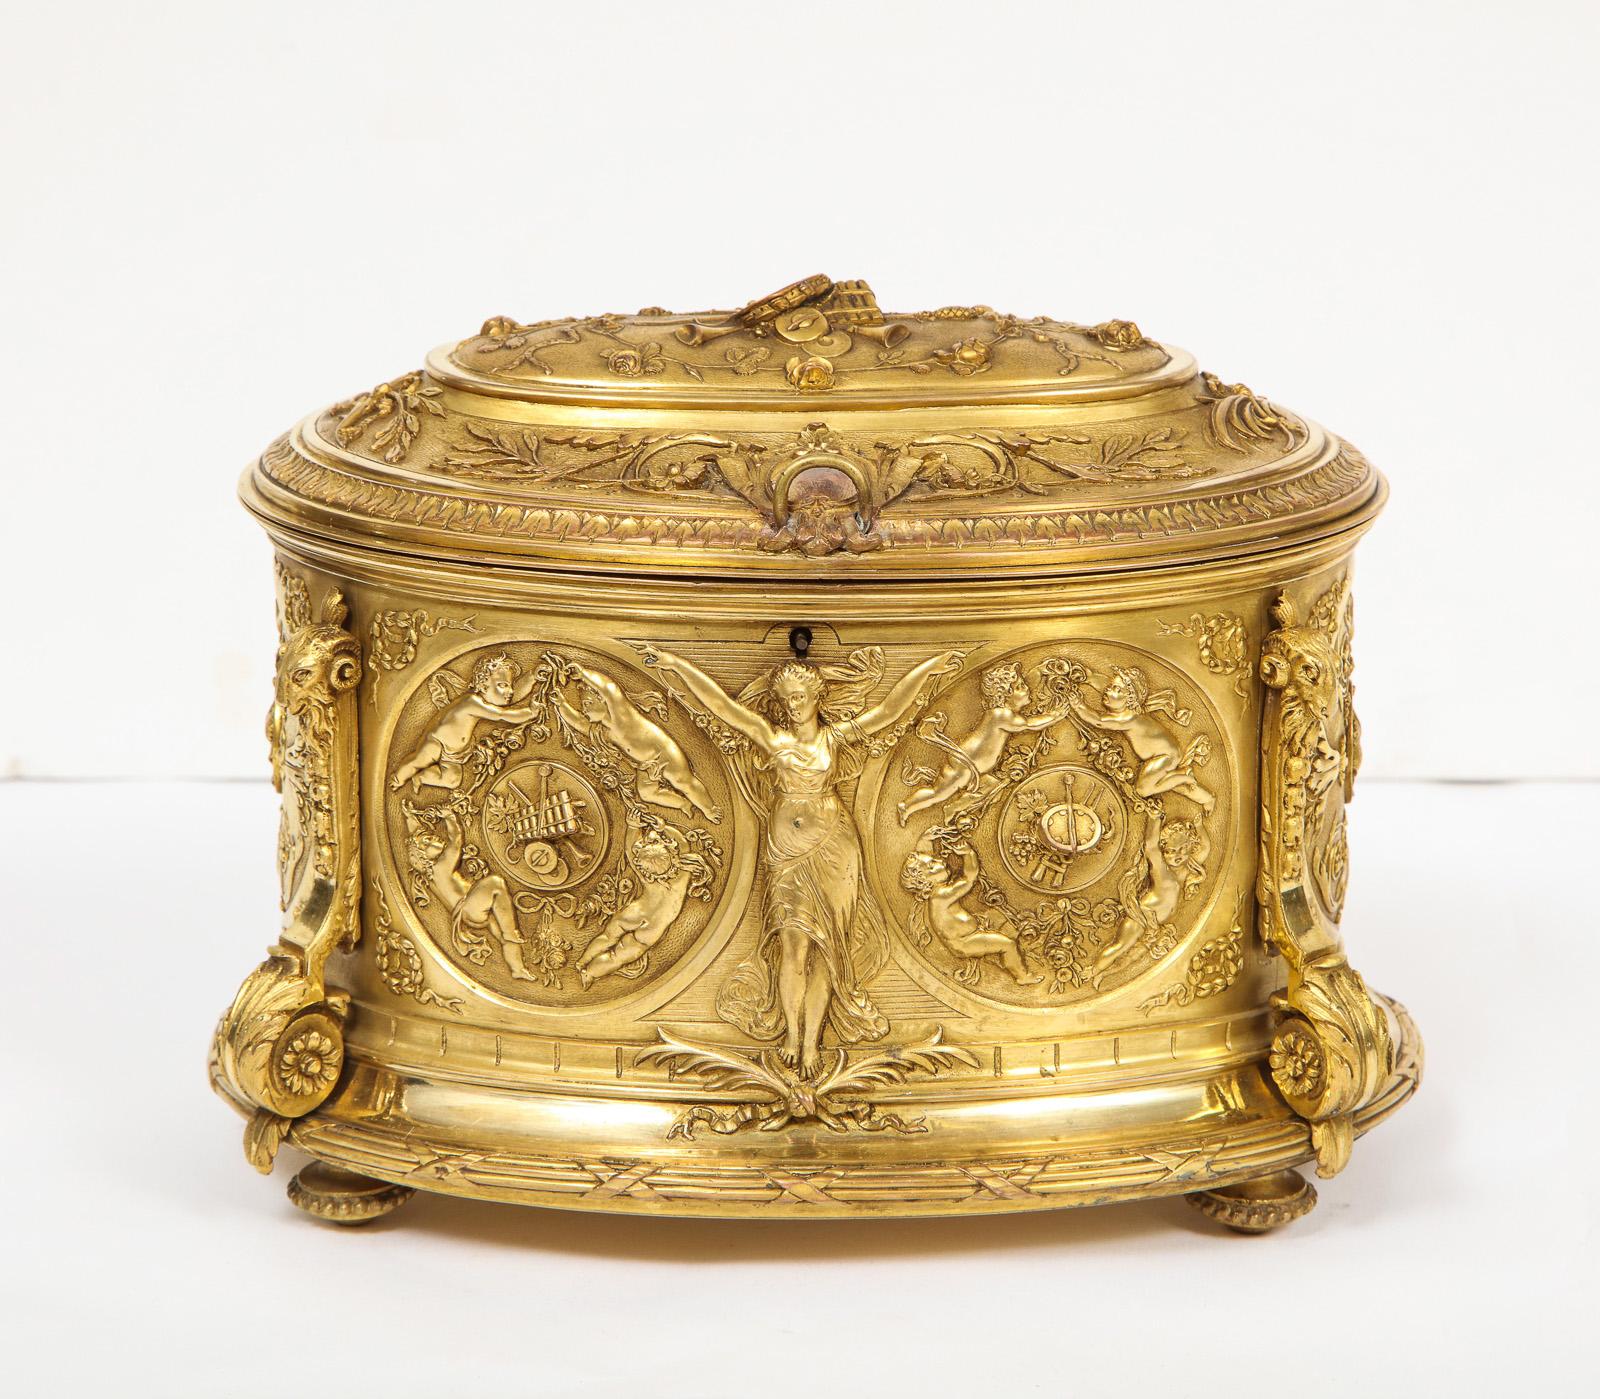 An extremely fine Napoleon III French ormolu bronze jewelry table box,
circa 1880 

Very fine quality. Very good size.

Good condition, ready to place.

Measures: 7